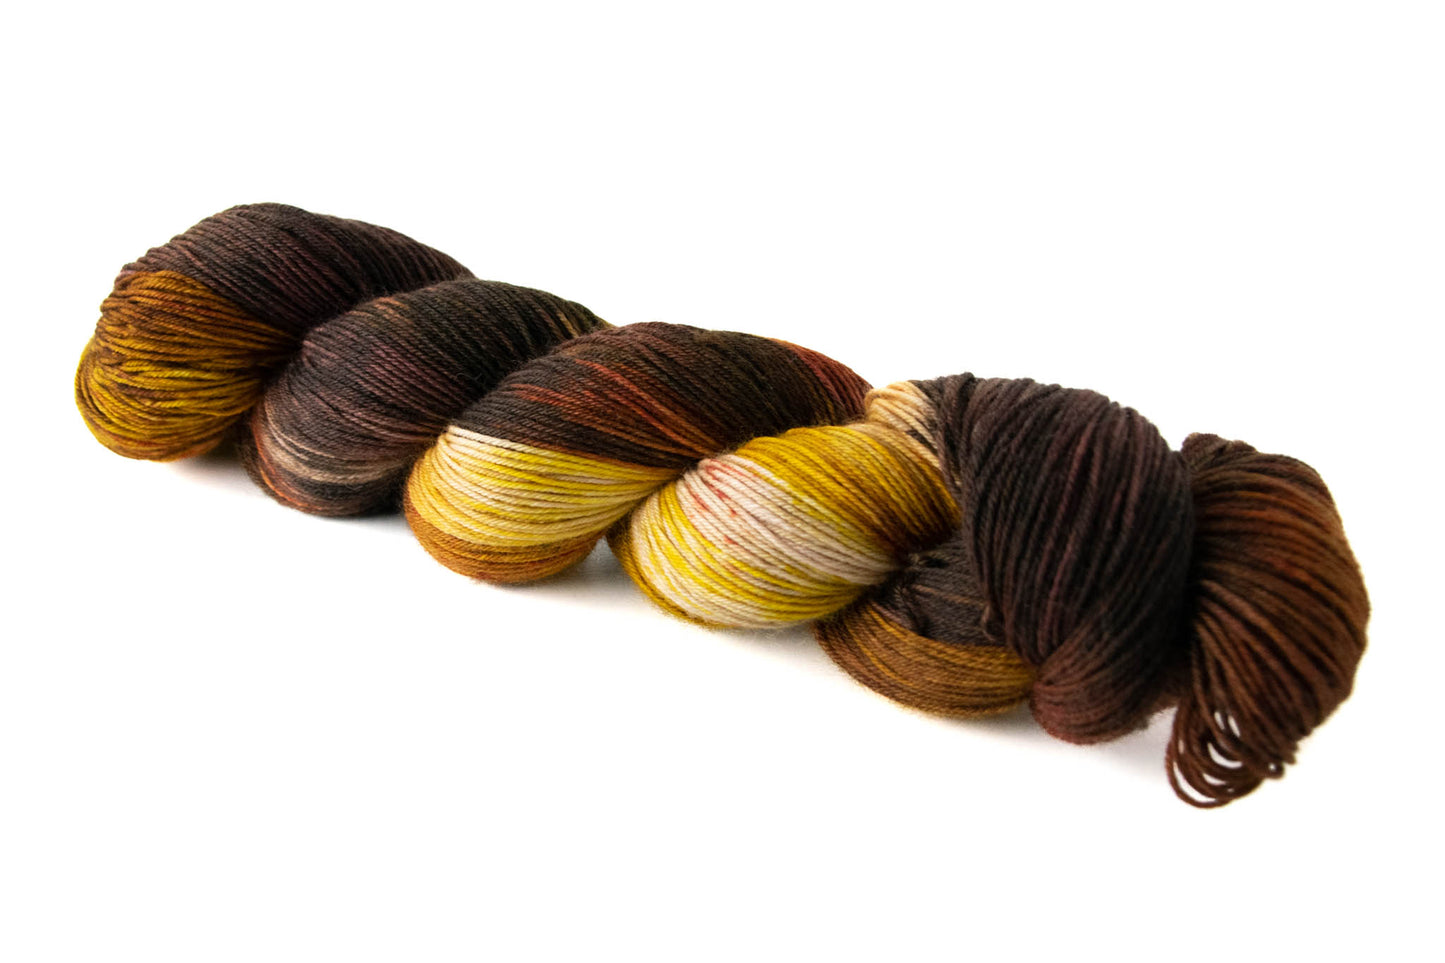 A skein of brown and yellow variegated hand dyed wool yarn with red speckles.